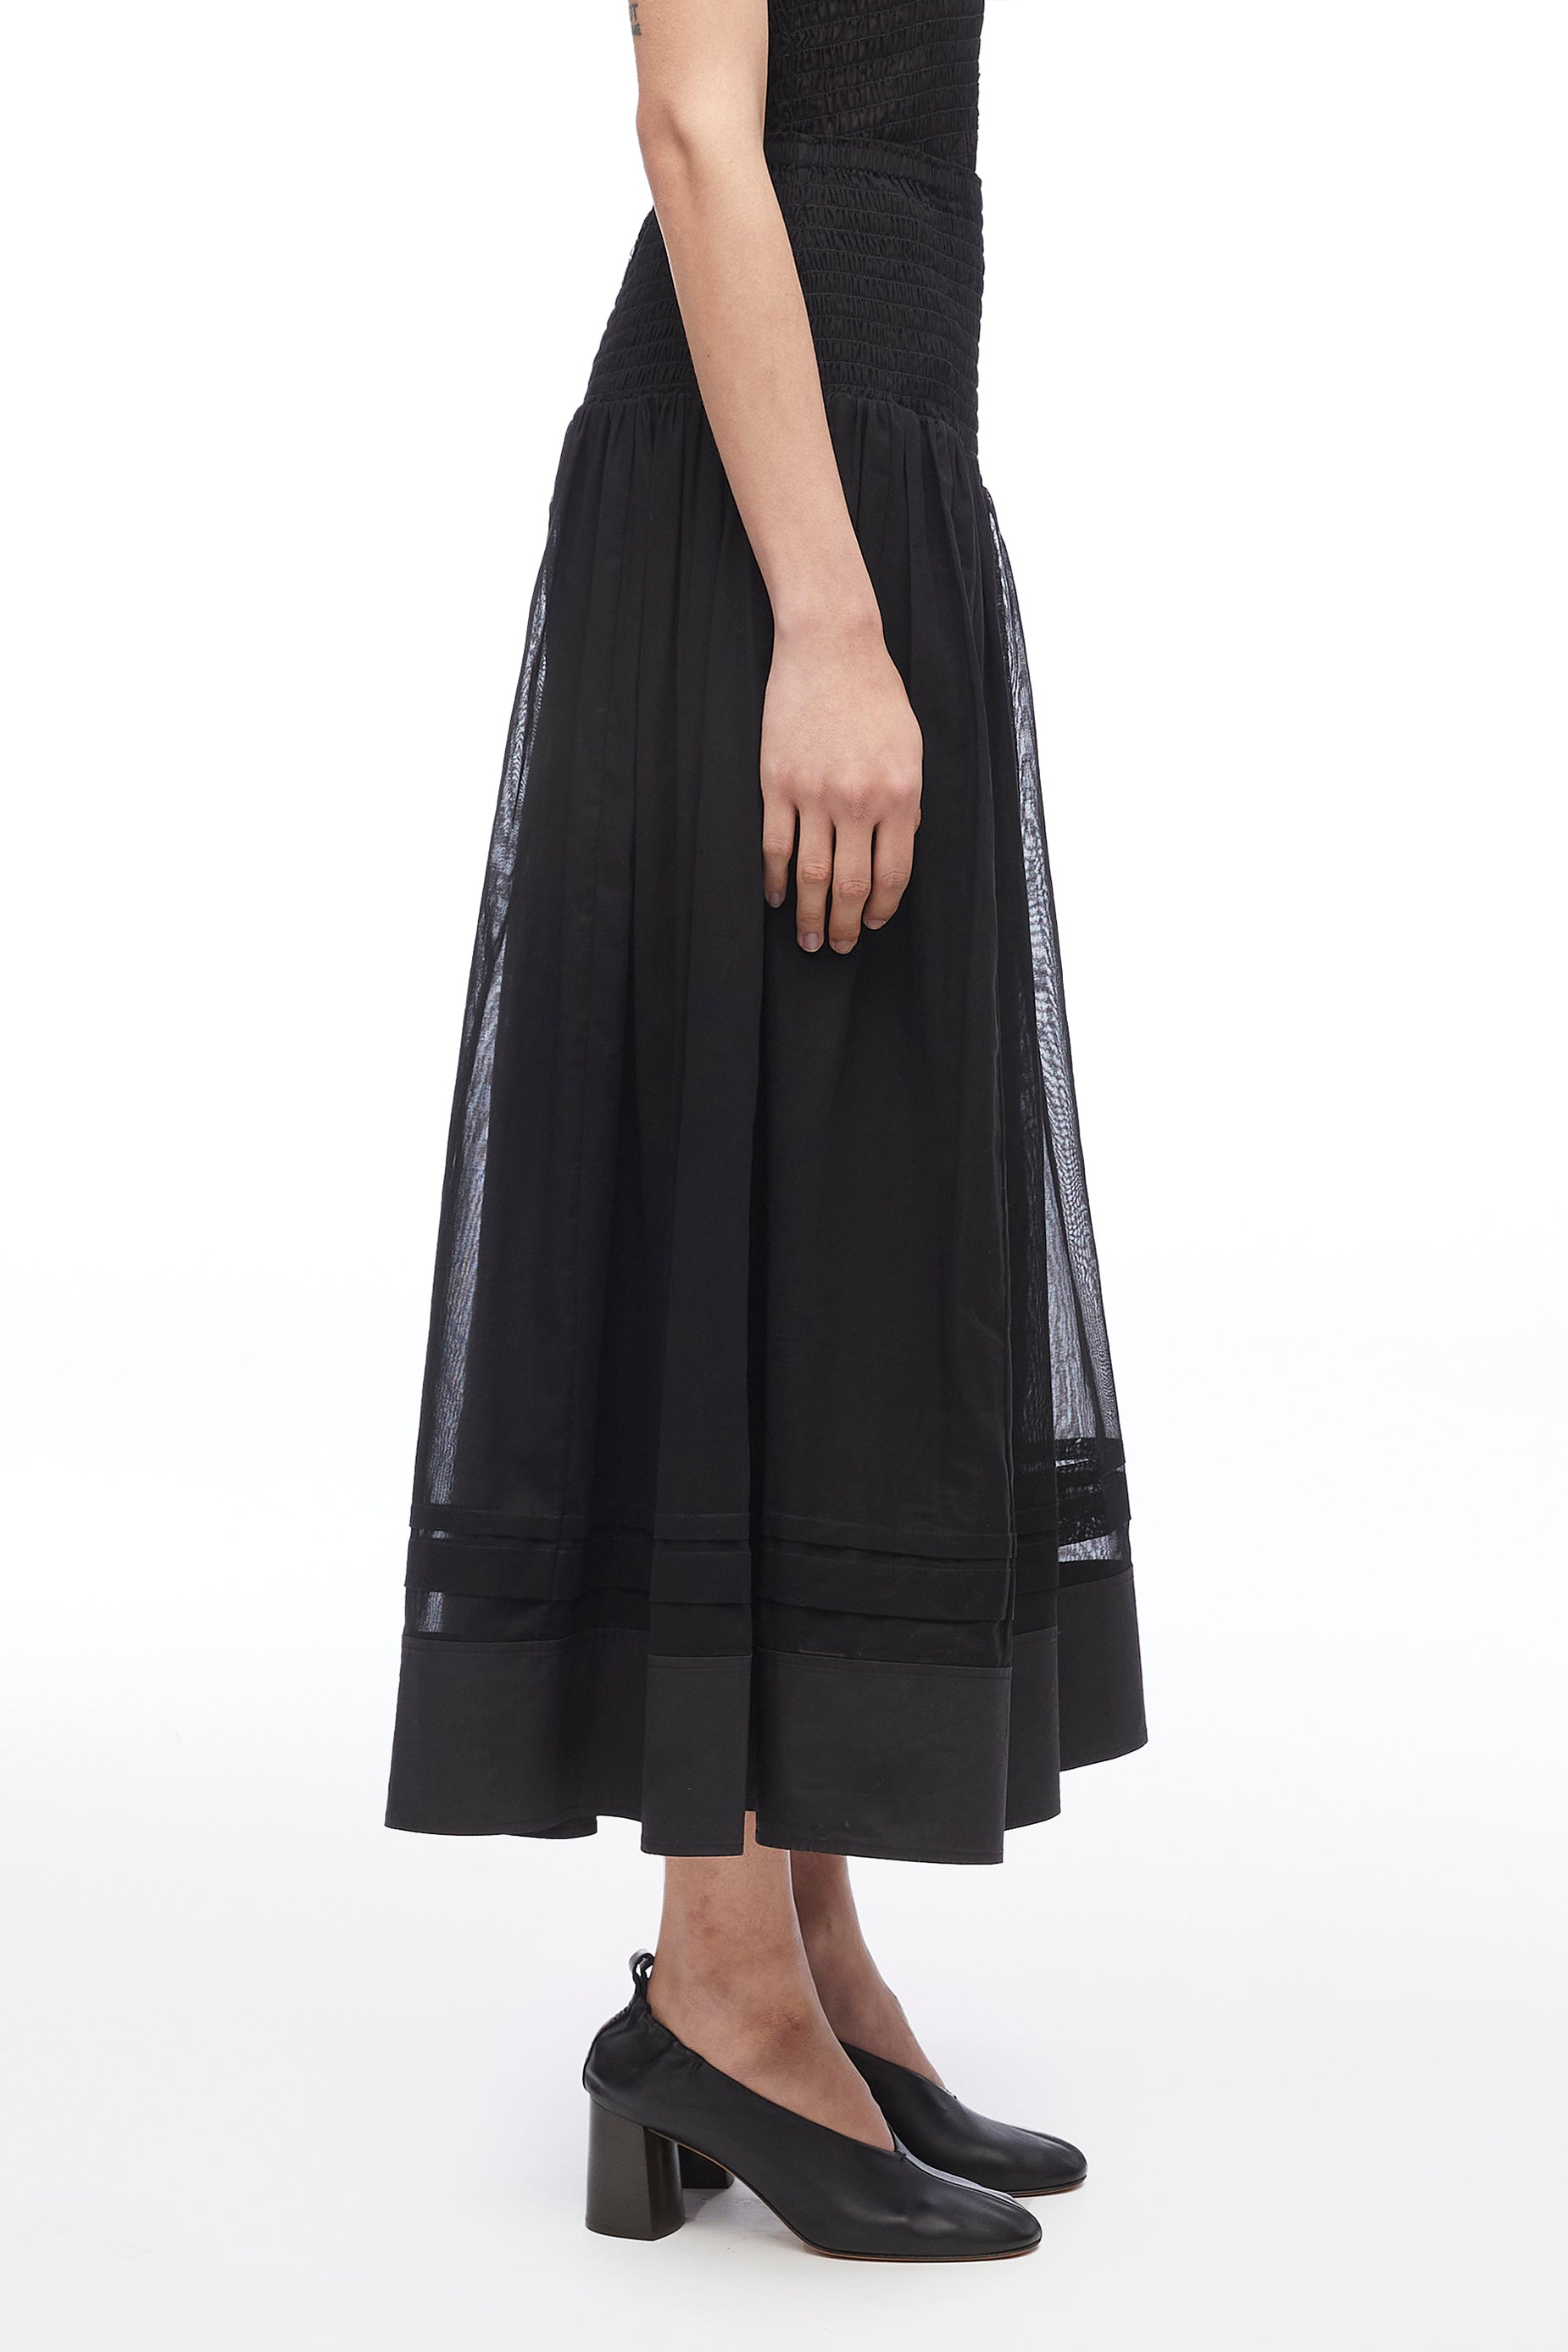 Cotton Voile Skirt With Smocking – 3.1 Phillip Lim